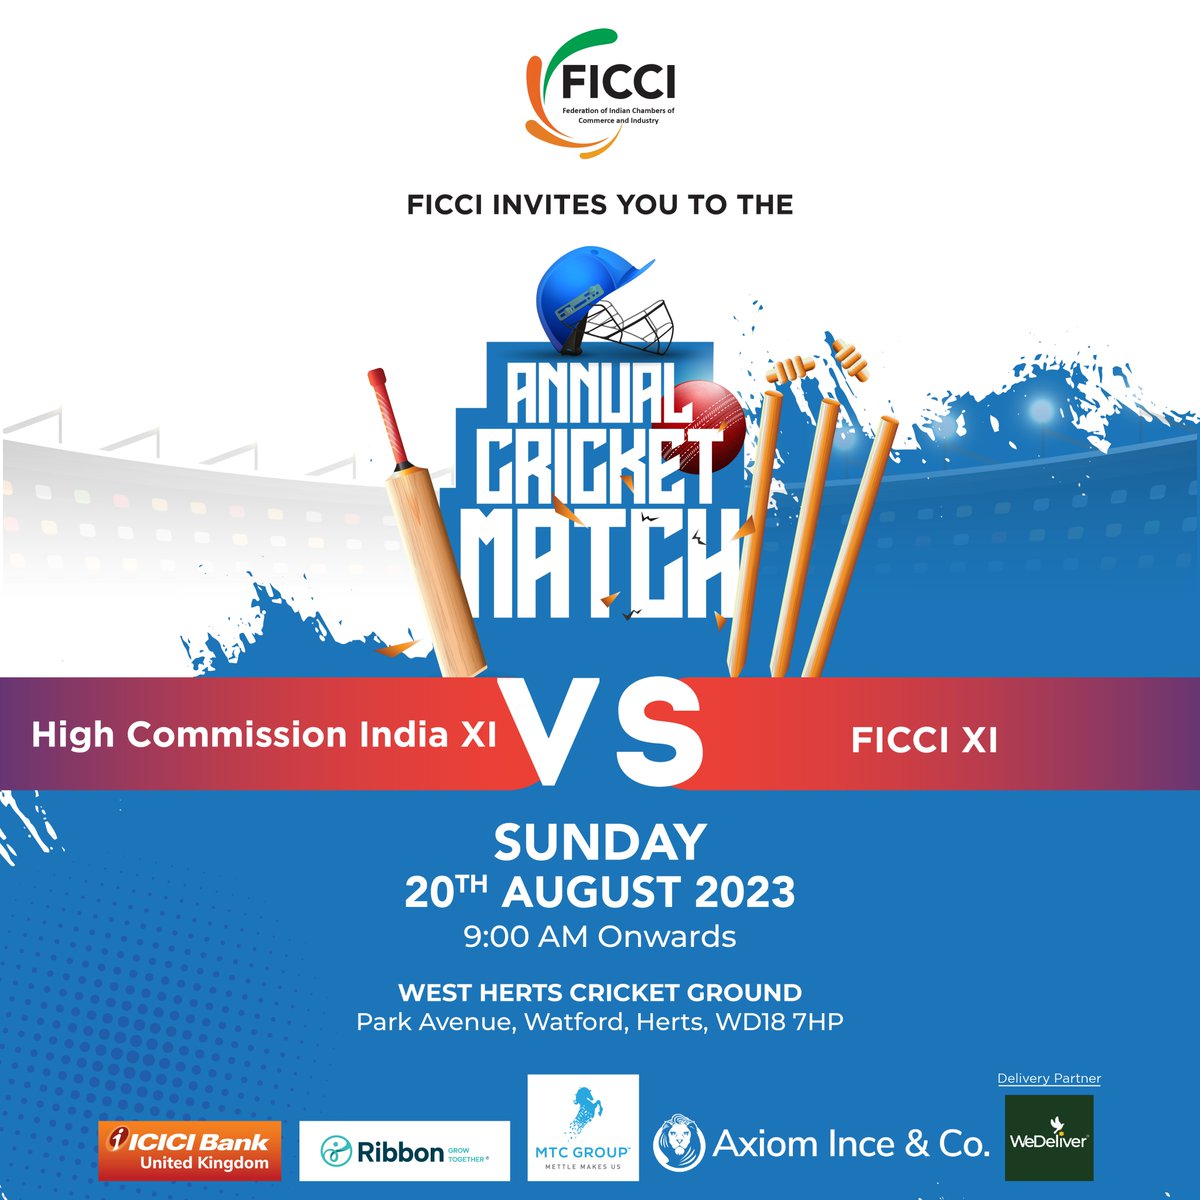 FICCI invites you to the Annual Cricket Match between @HCI_London and FICCI on 20 August 2023 at the West Herts Cricket Ground, Park Avenue, Watford WD18 7HP, United Kingdom